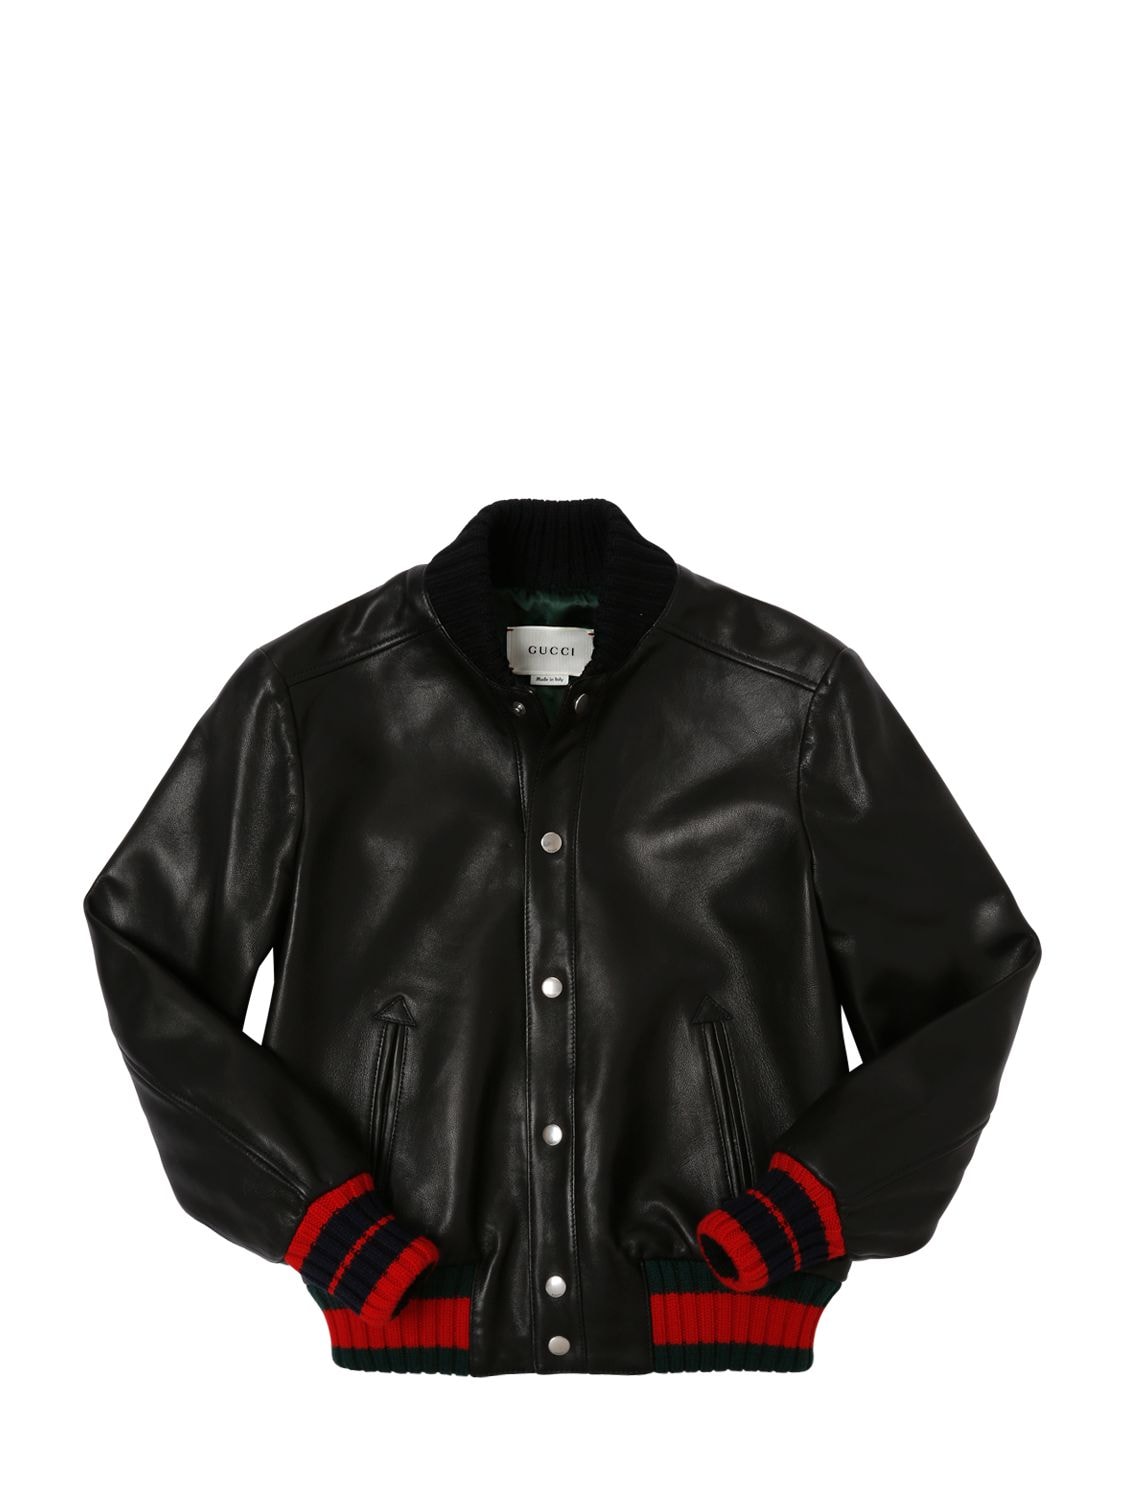 Gucci Kids' Nappa Leather Bomber Jacket In Black